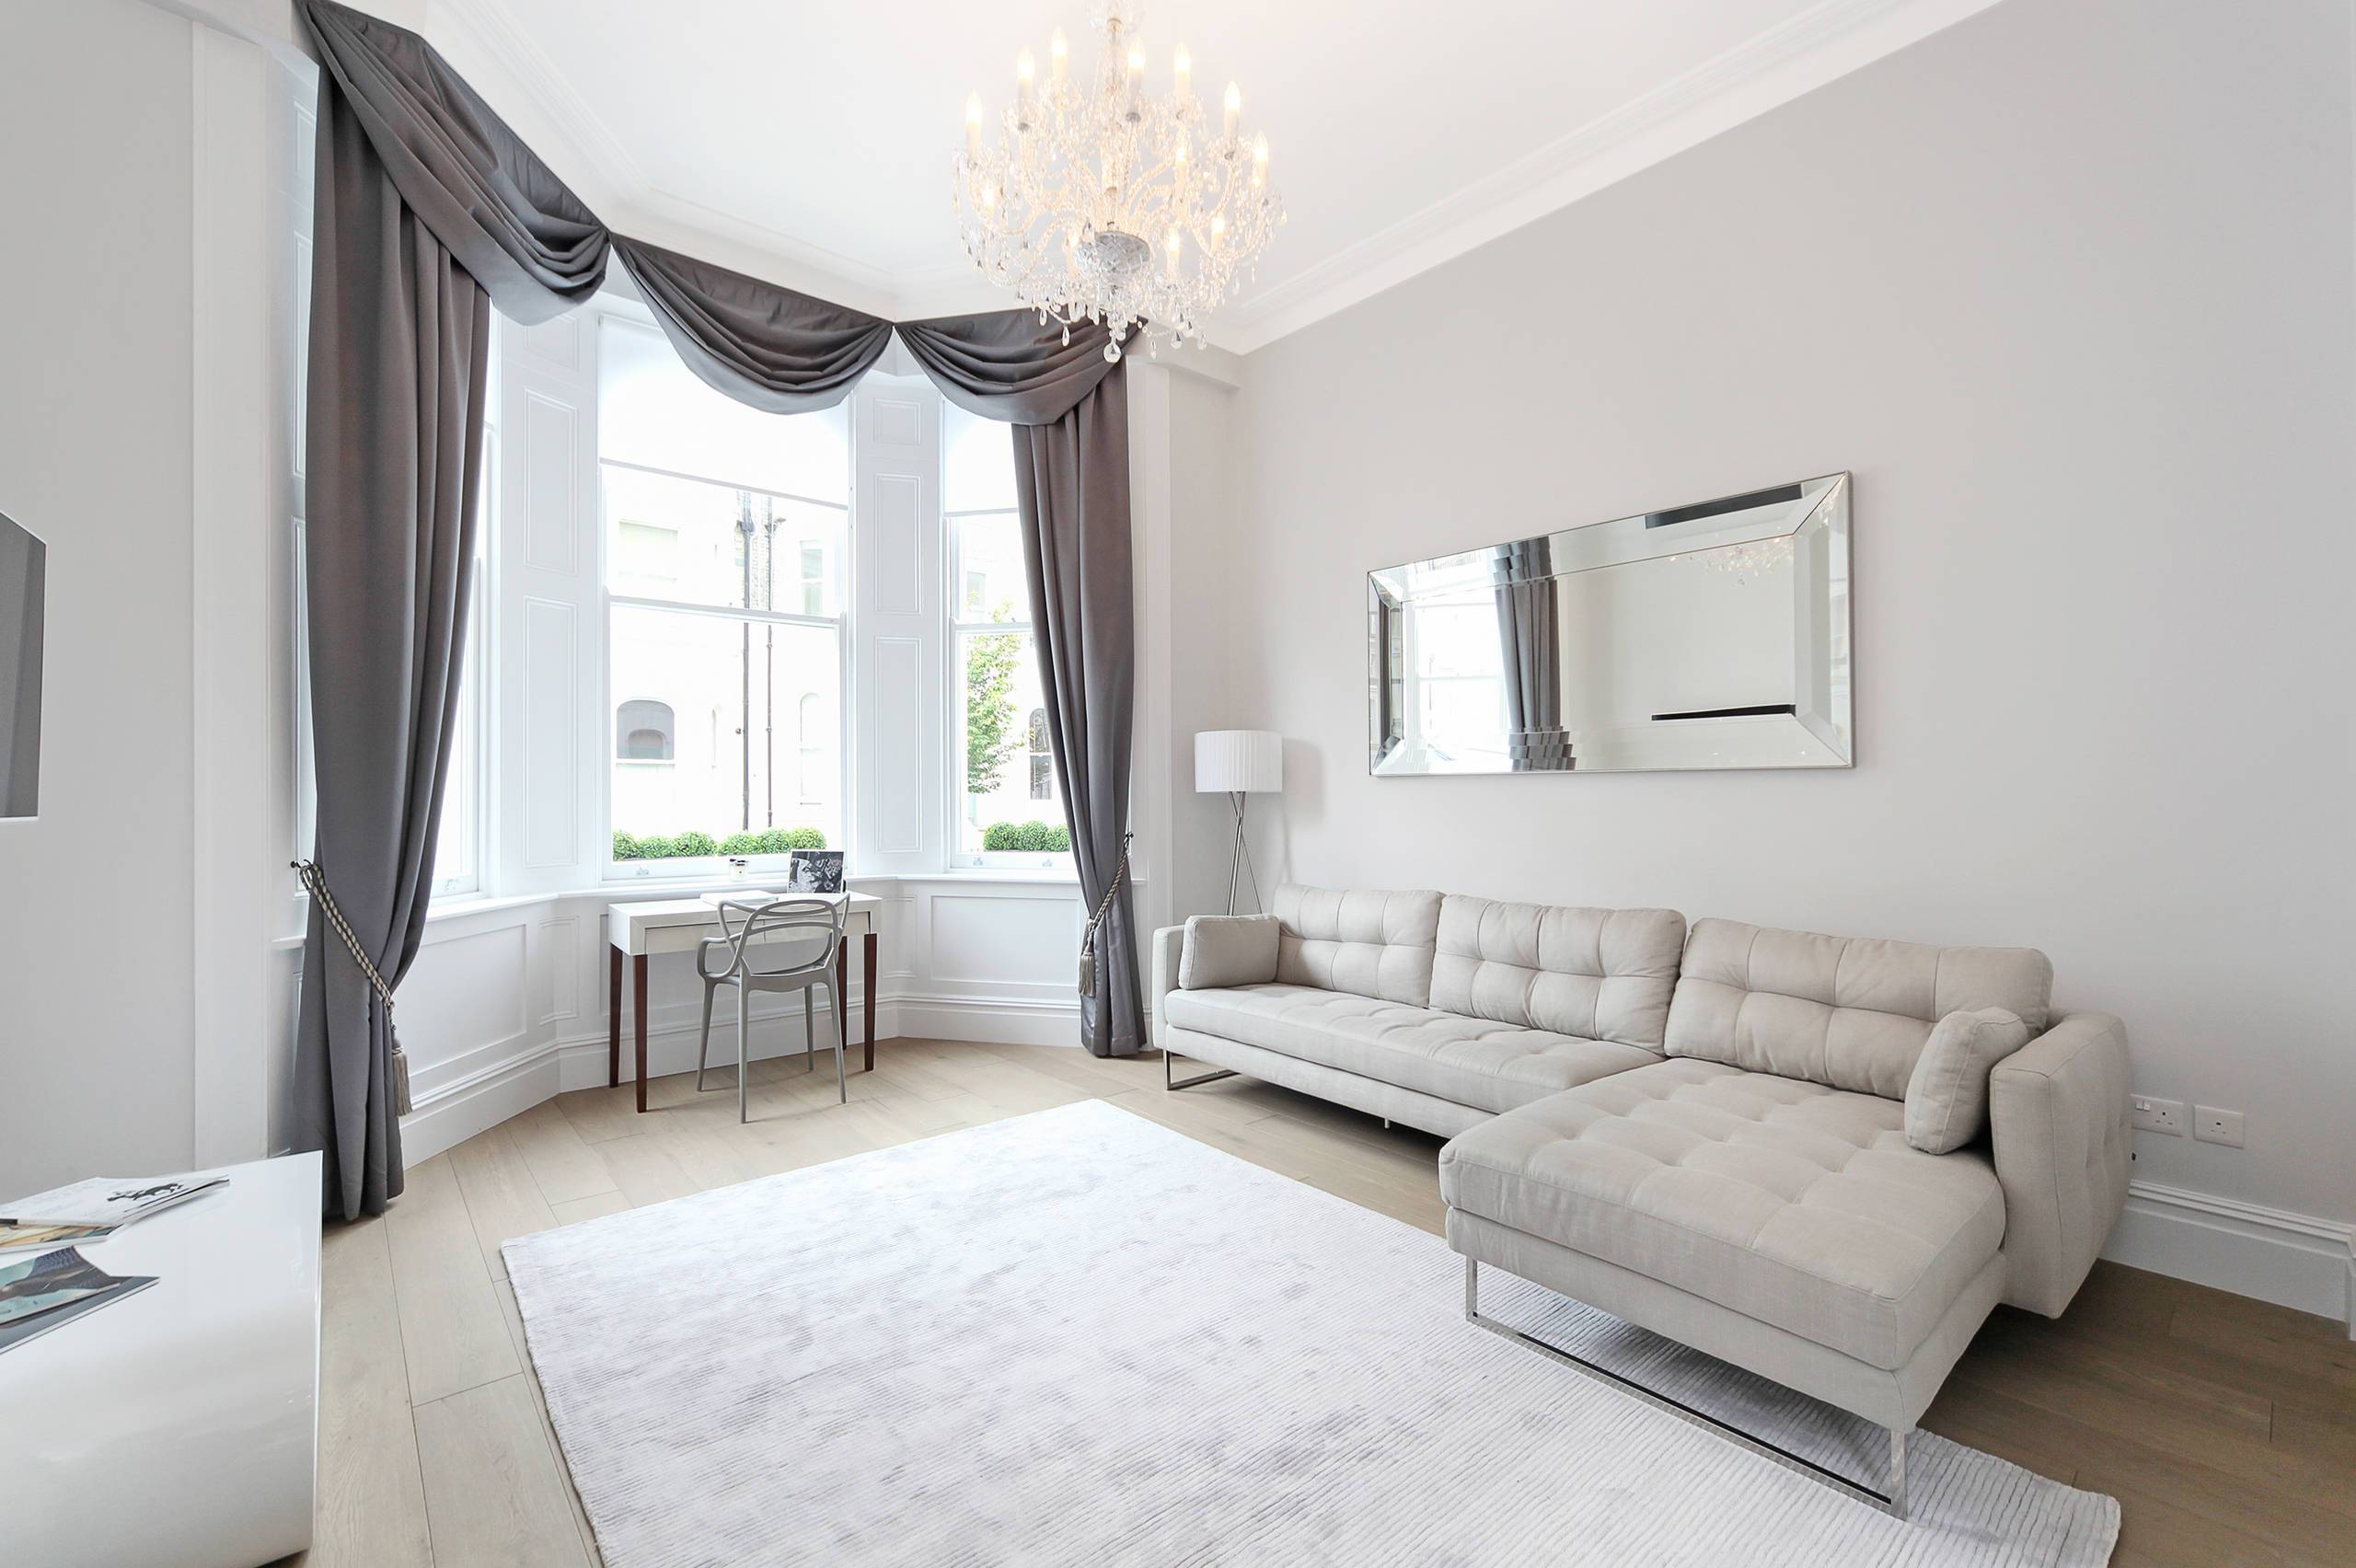 Light grey is a year-round choice (from Houzz)